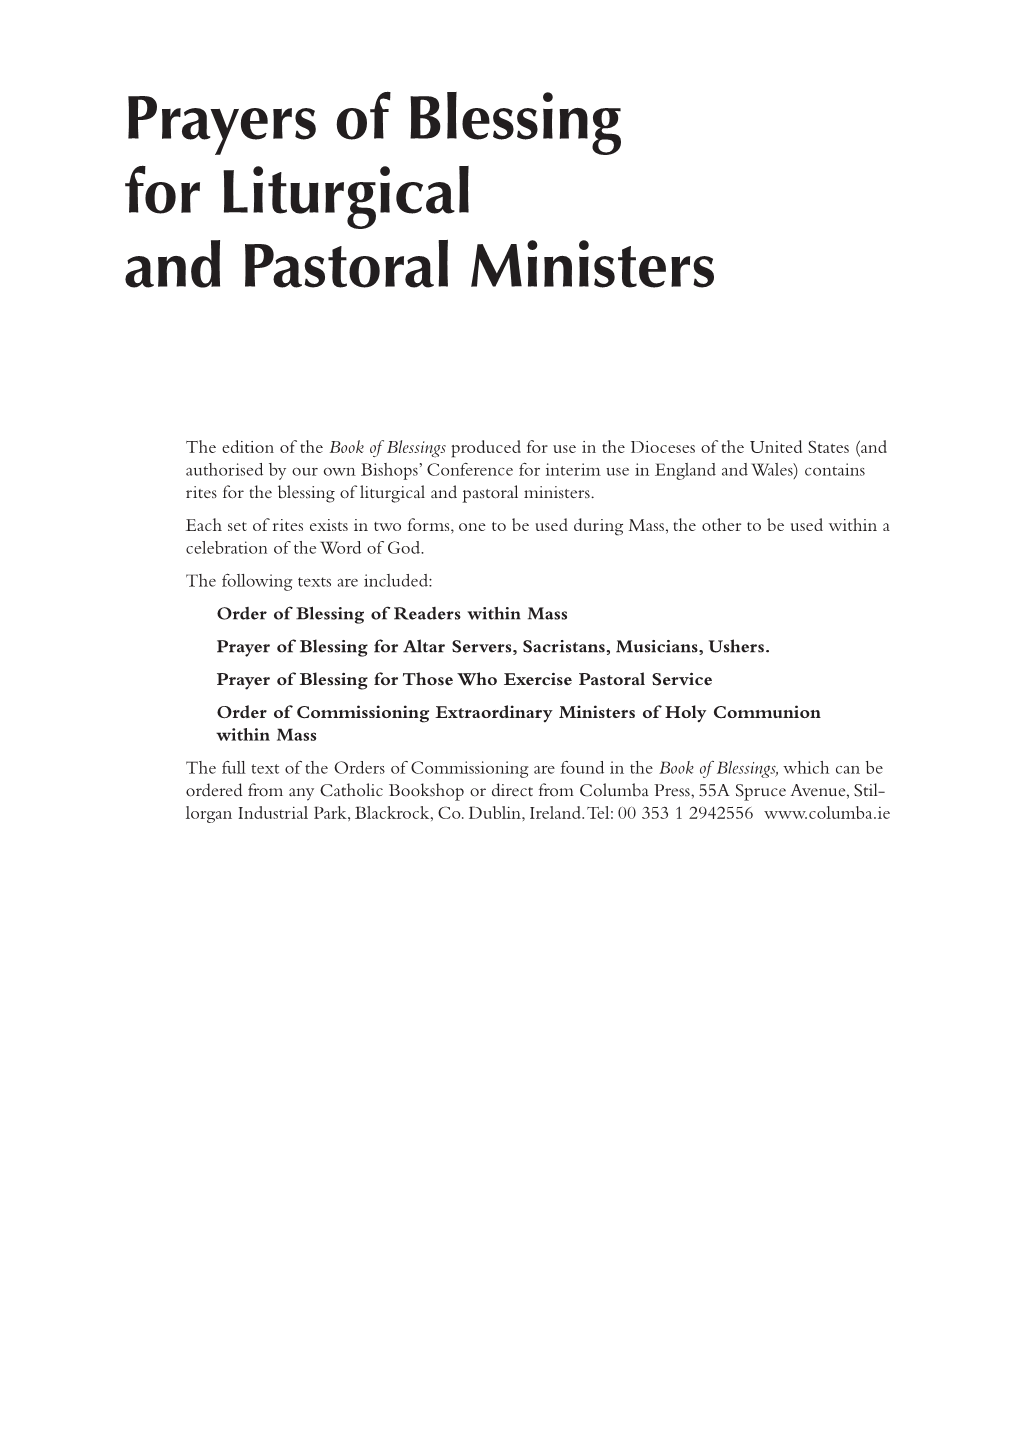 Prayers of Blessing for Liturgical and Pastoral Ministers